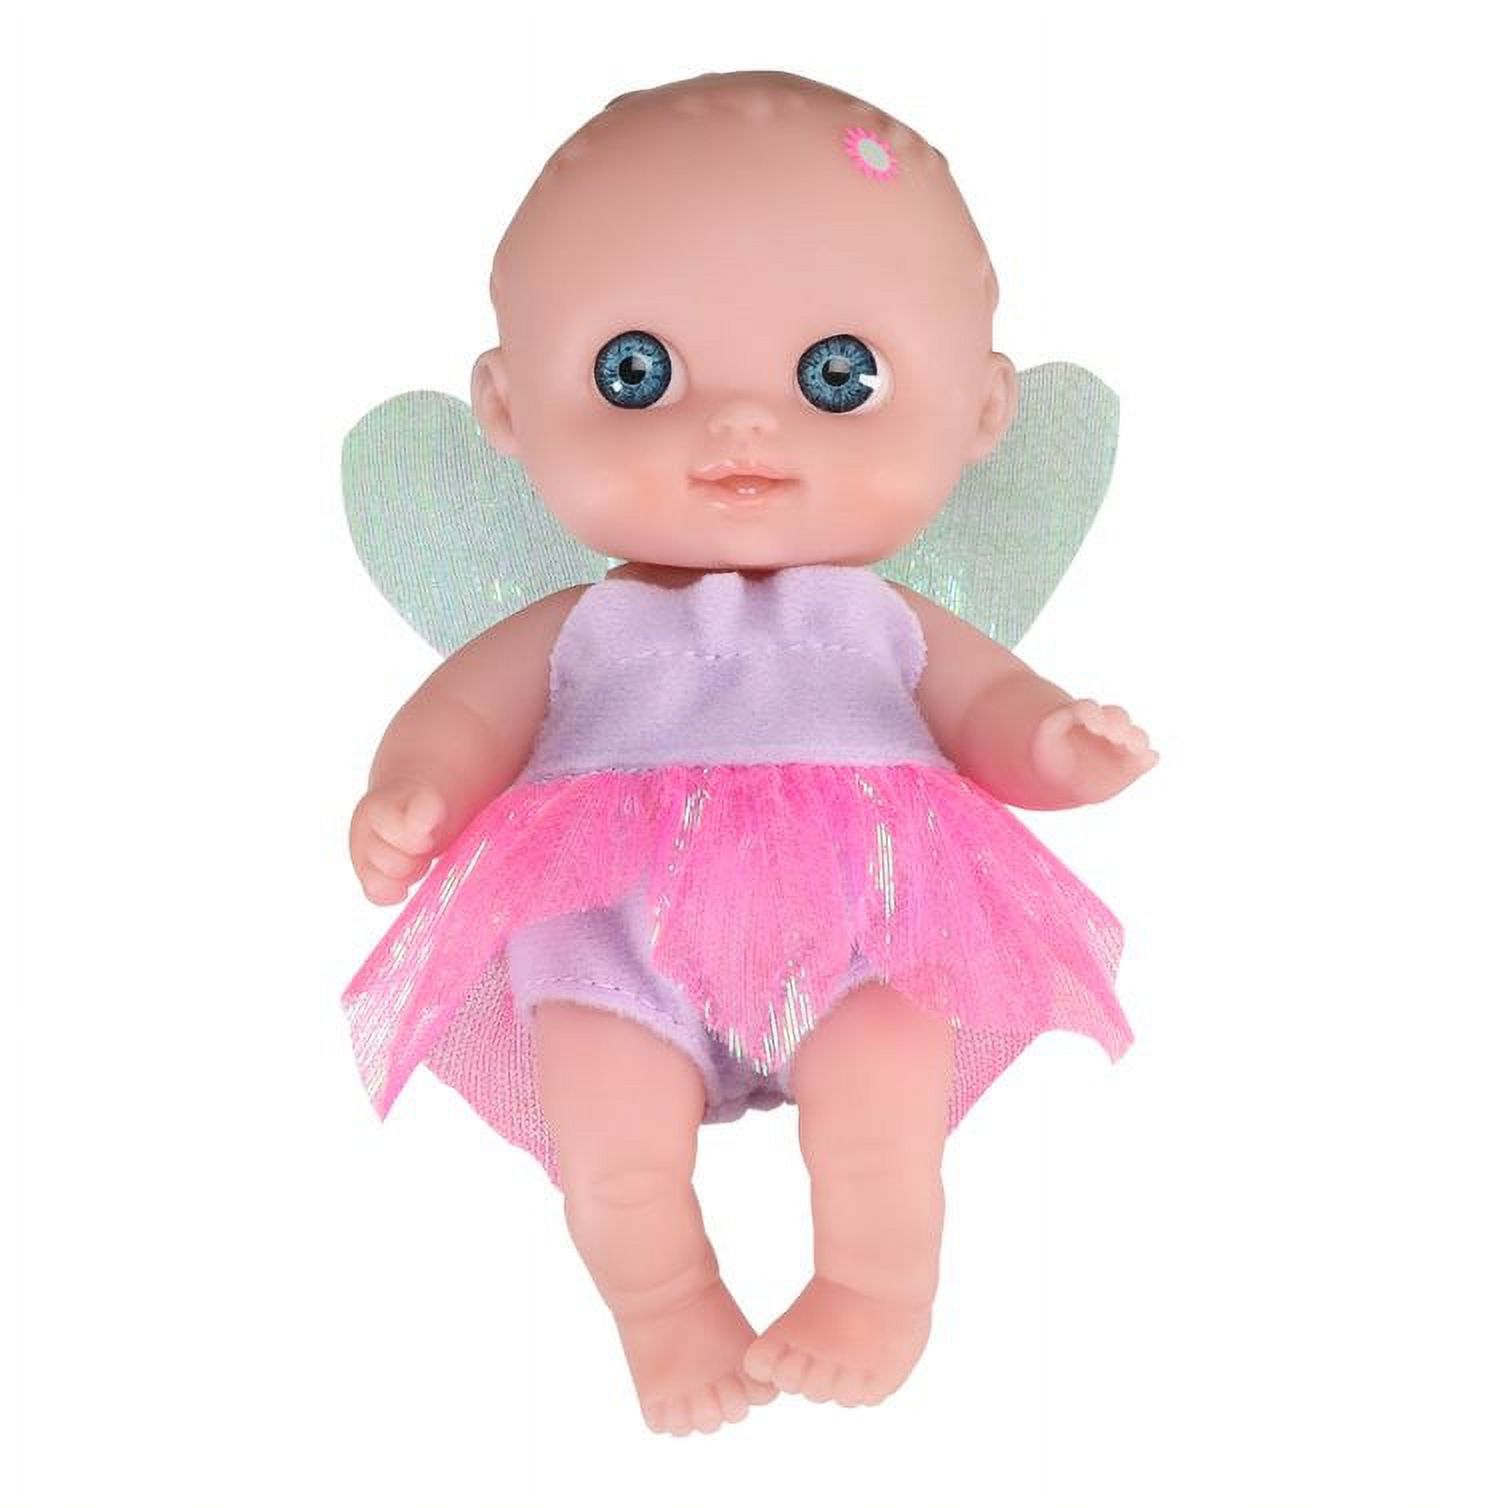 My Sweet Love Lil Cuties 5" Tall Baby Doll with Removable Outfit - image 3 of 5